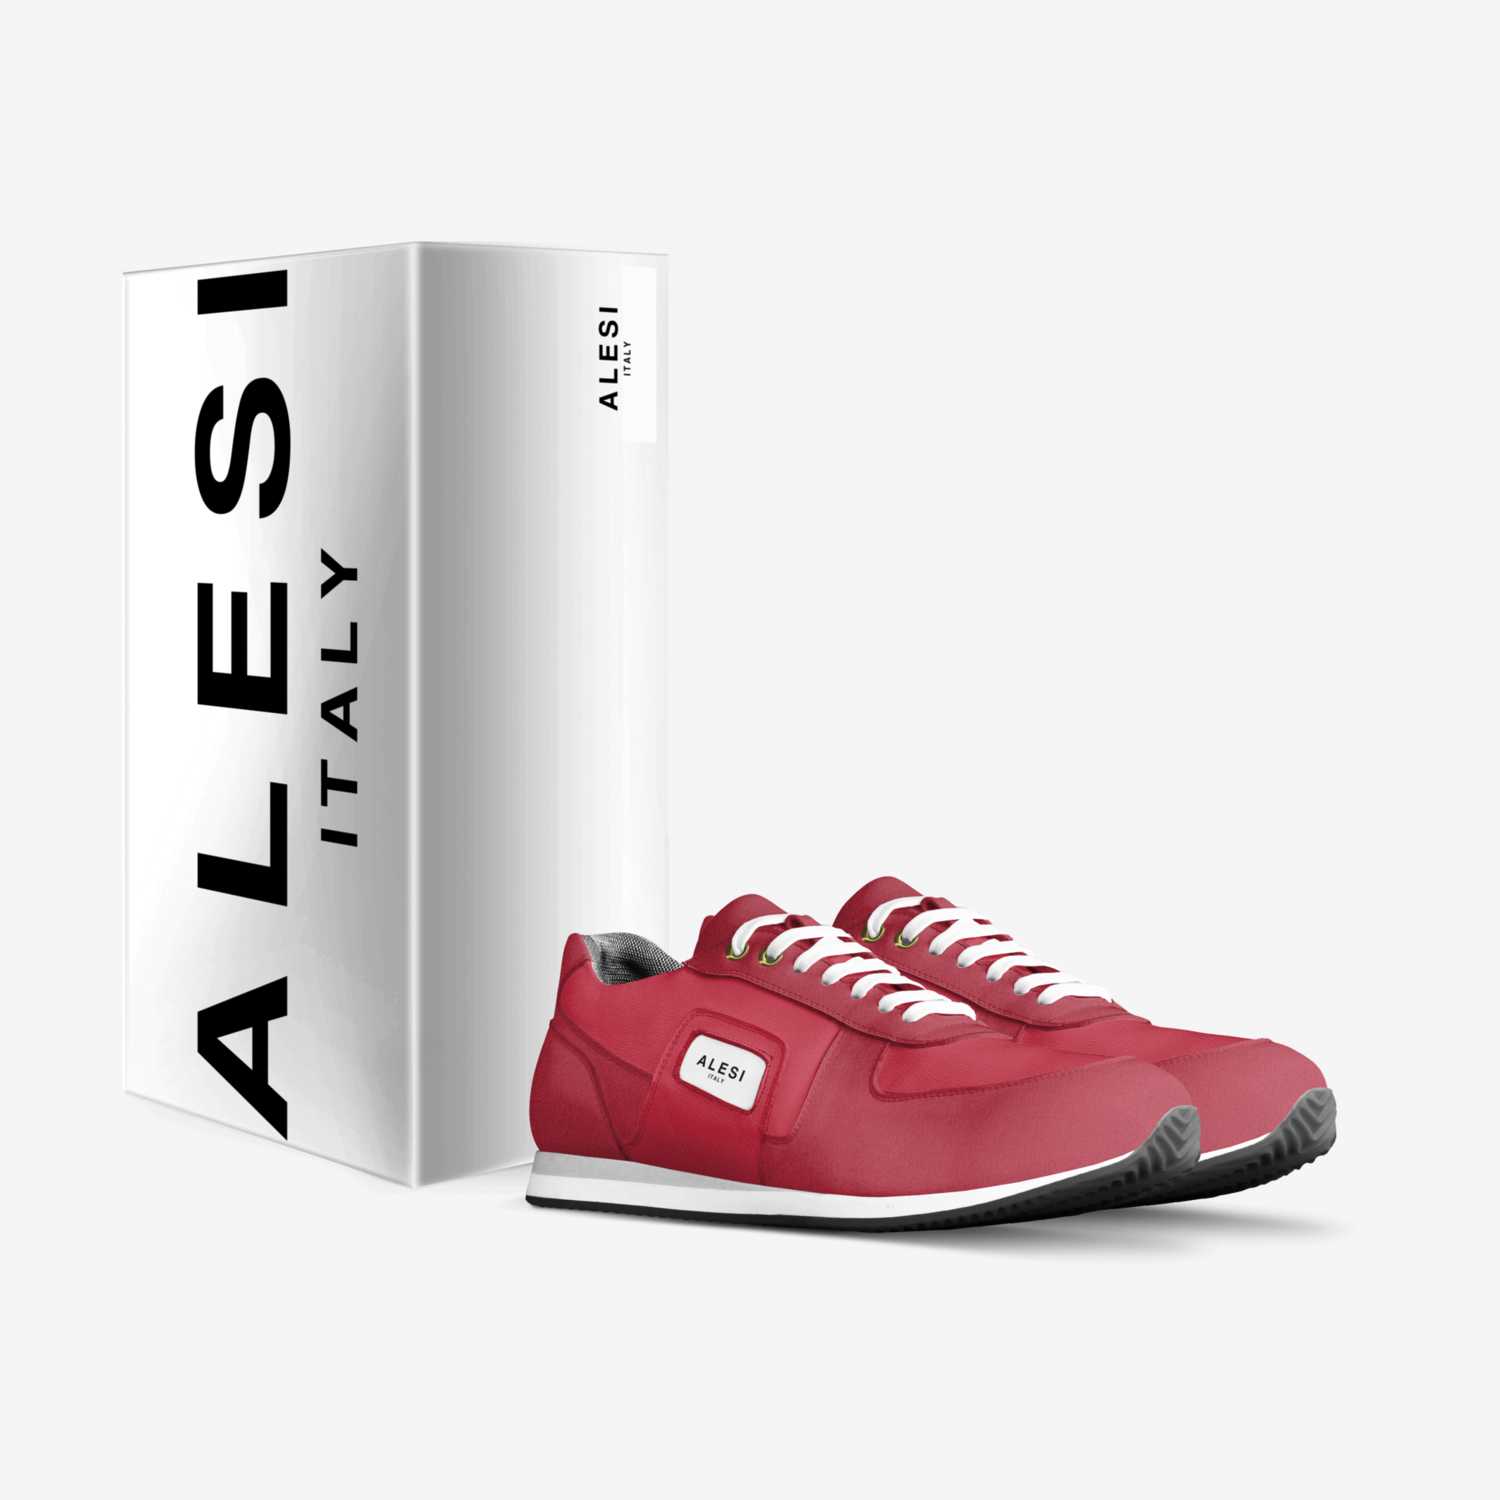 Alesi Runner custom made in Italy shoes by Lonanthony Parker | Box view